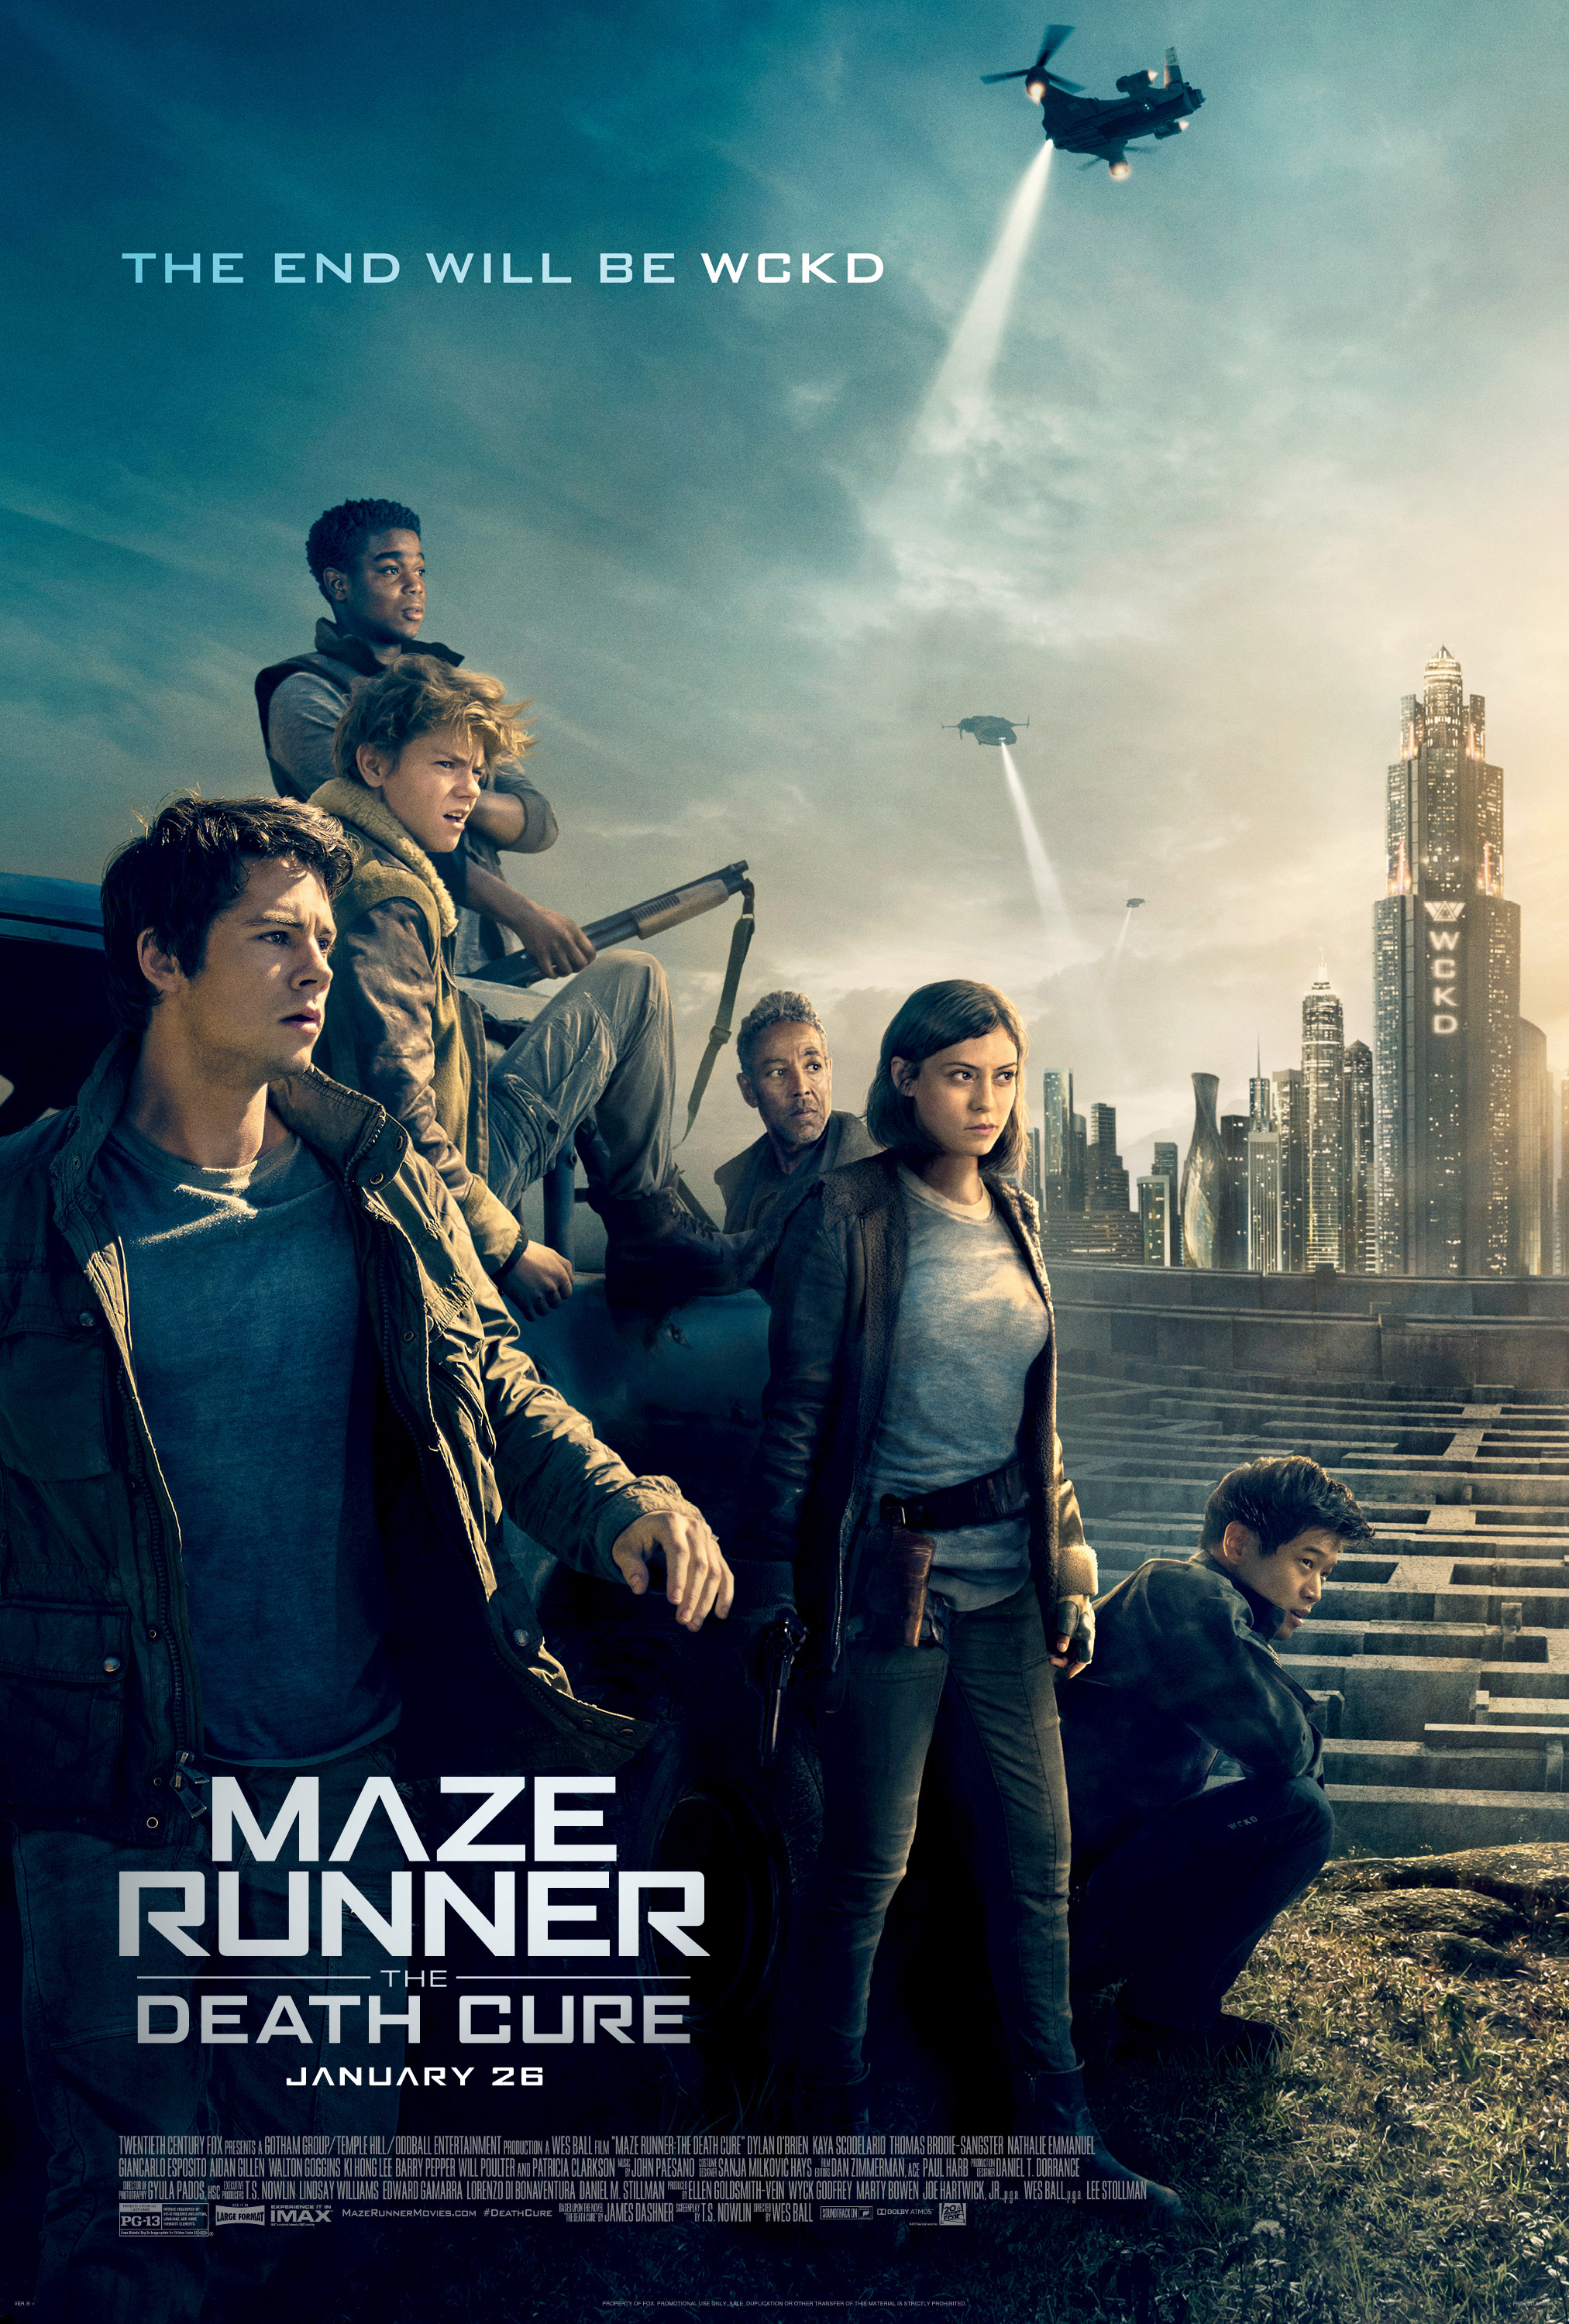 Maze Runner Trilogy - Movies on Google Play